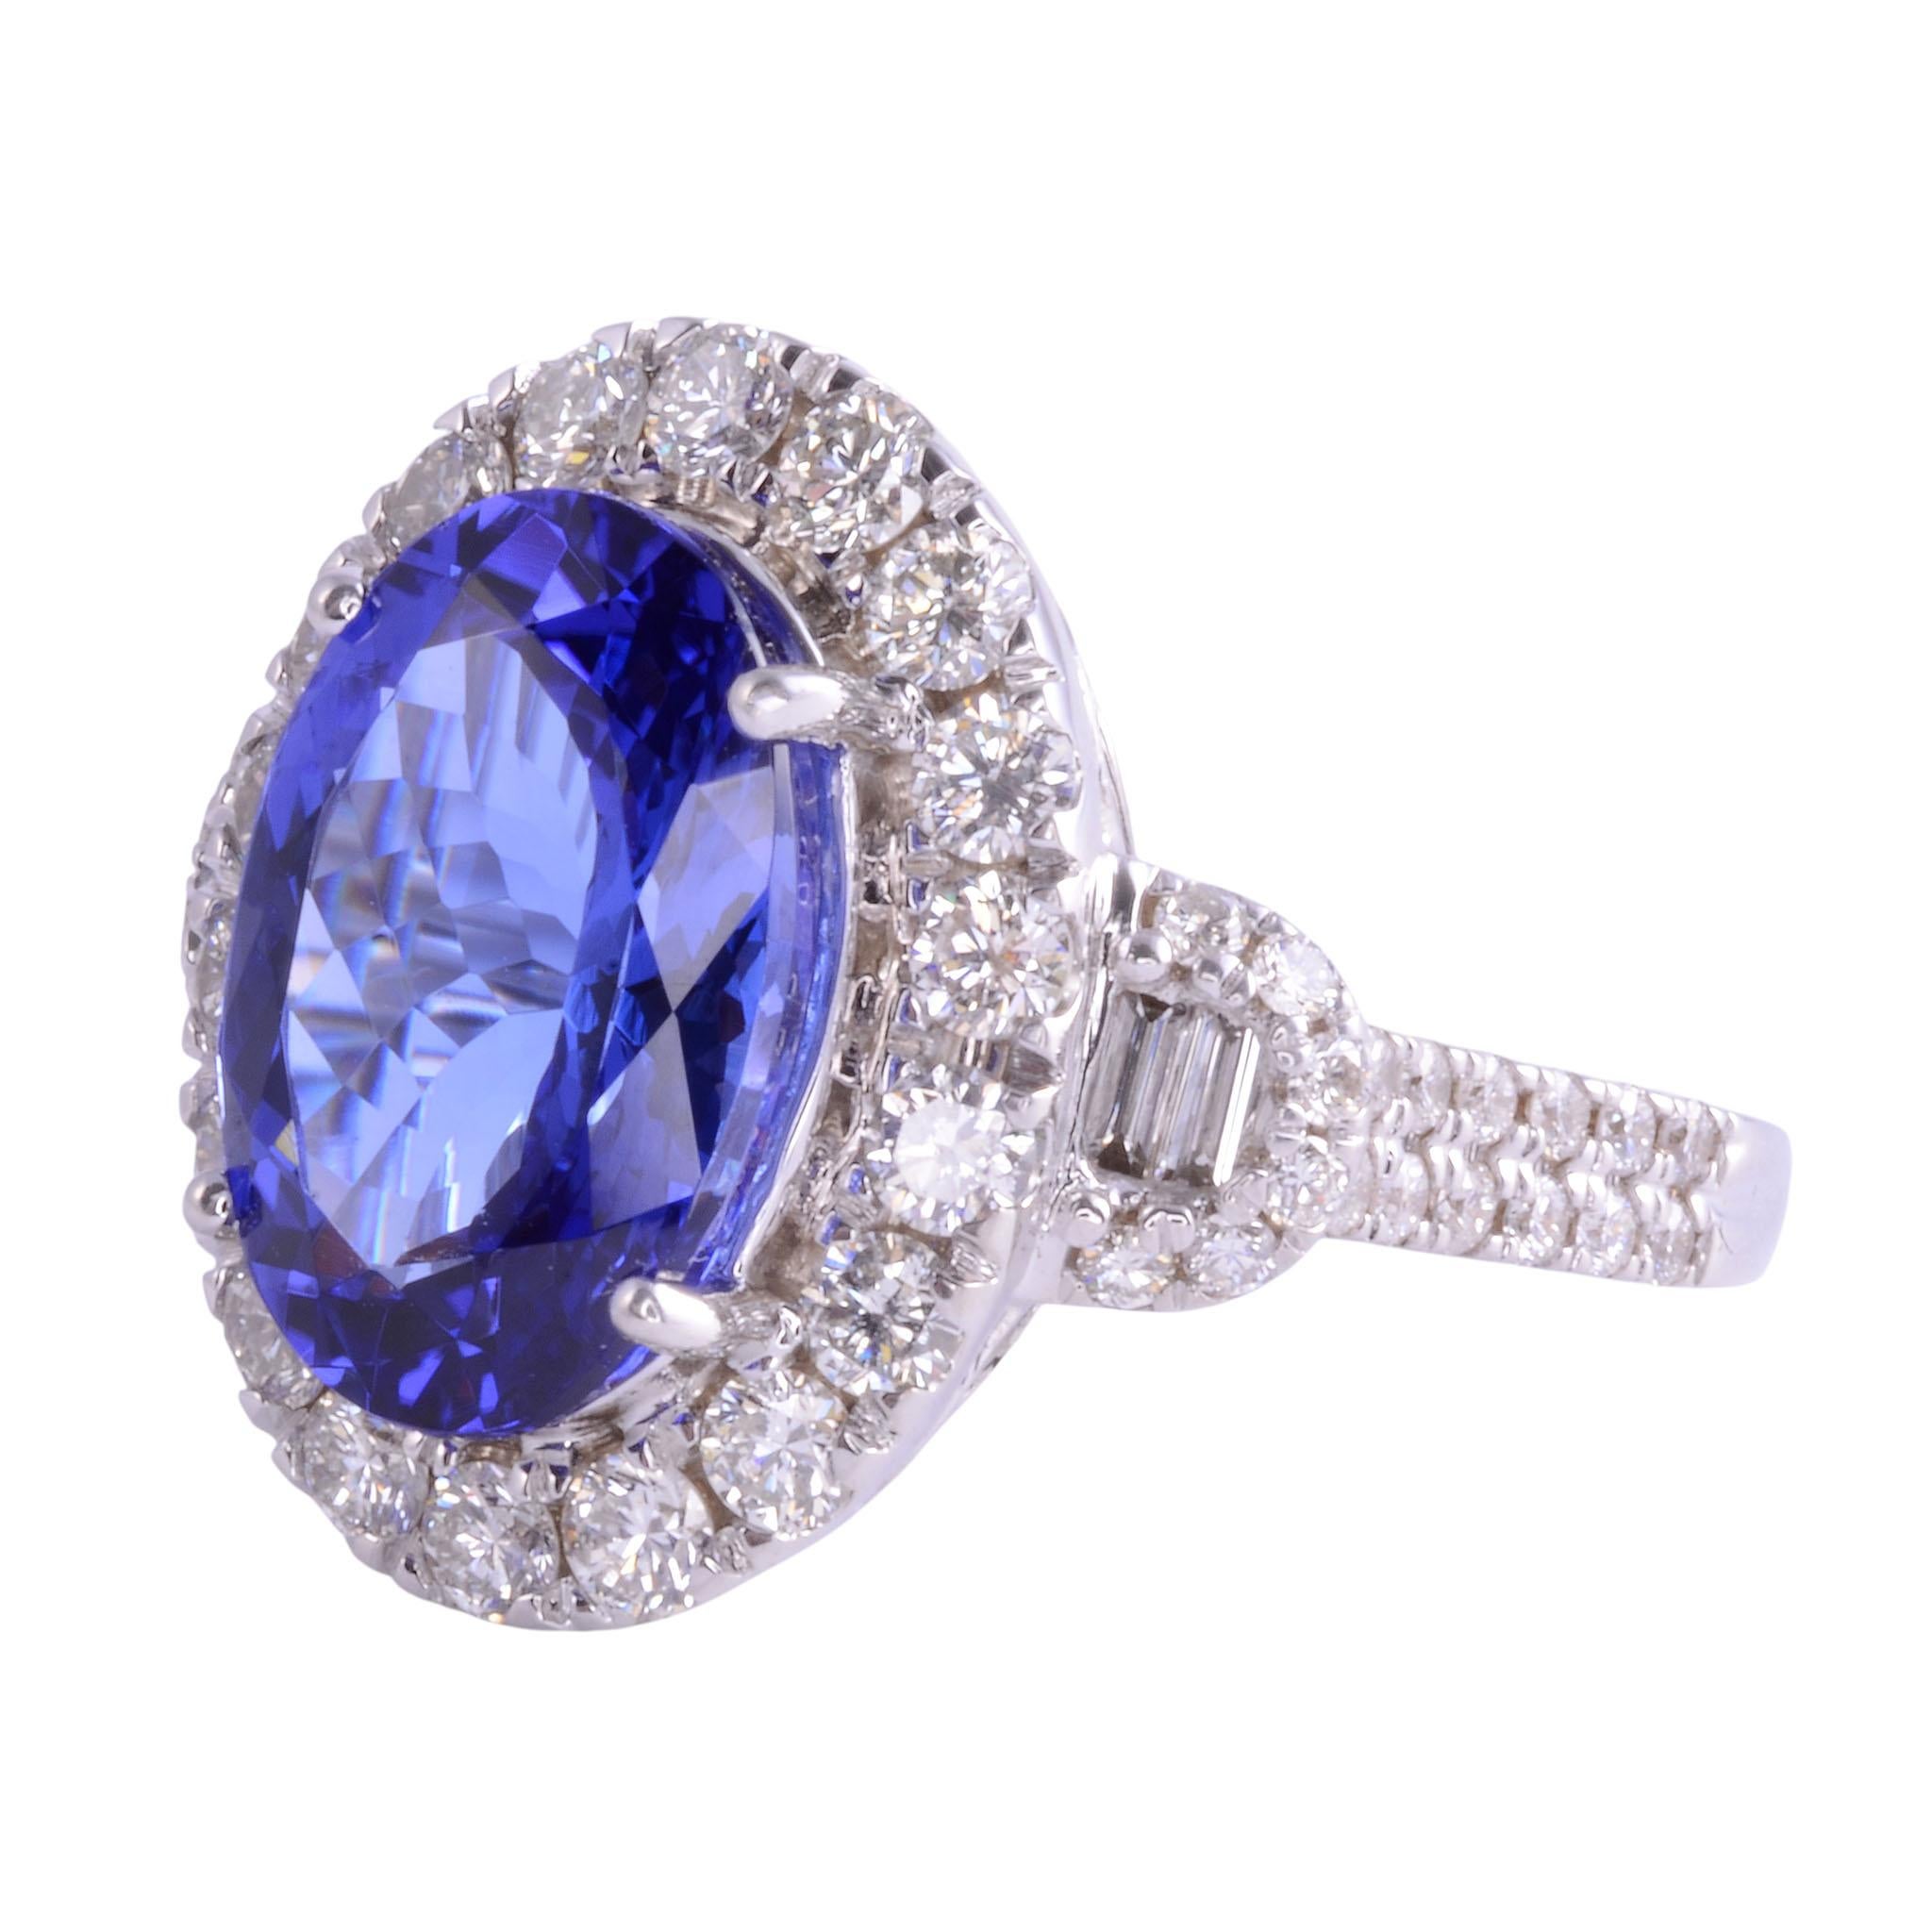 Estate tanzanite & diamond 18K white gold ring. This 18 karat white gold ring features an oval 5.08 carat tanzanite center accented with 1.39 carat total weight of diamonds. There are 54 full cut diamonds at 1.19 carat total weight having VS2-SI2